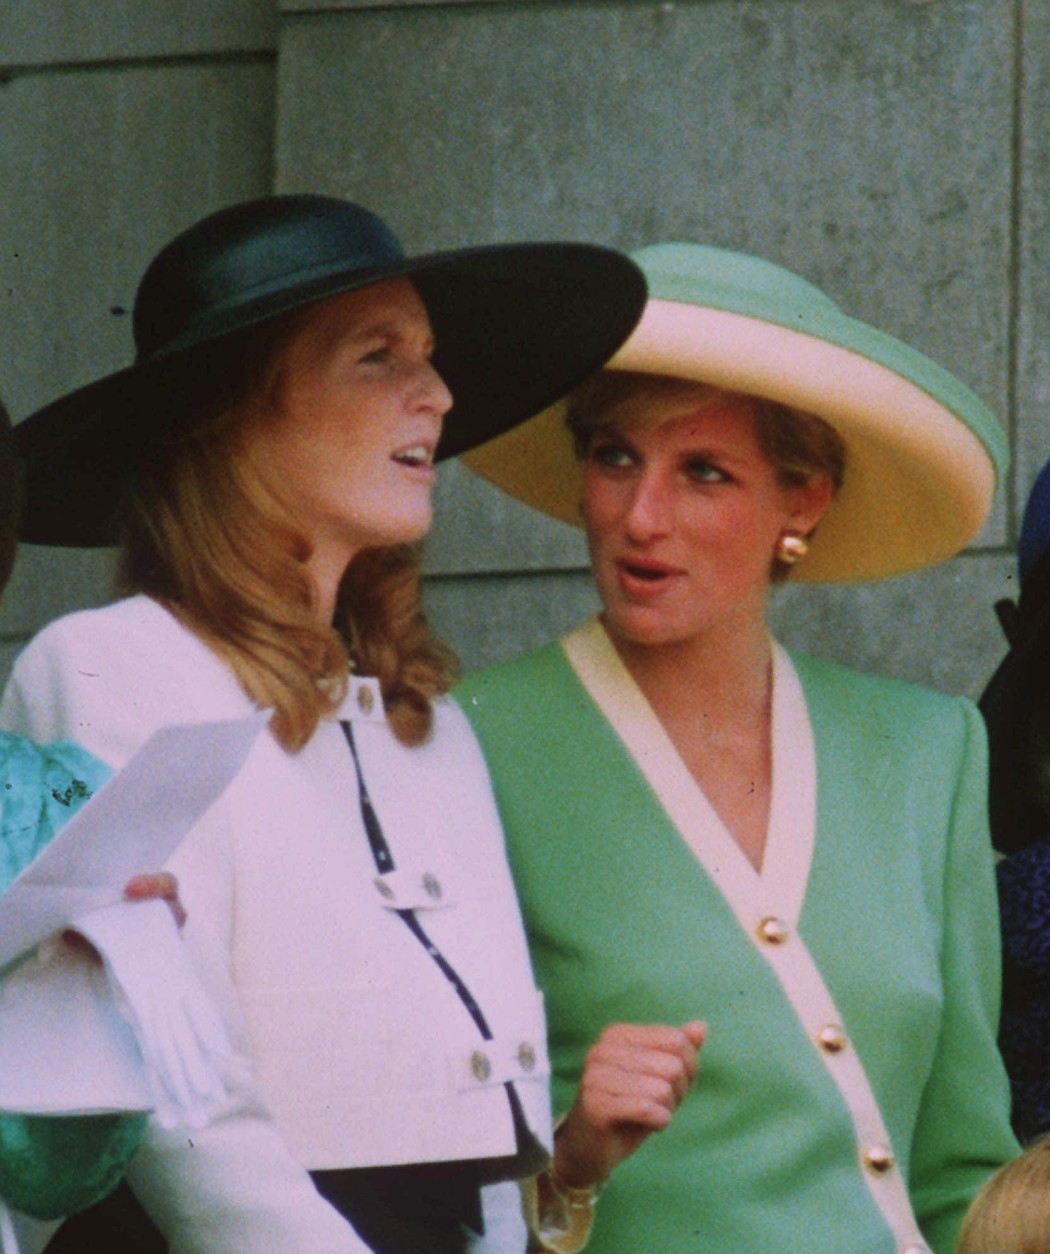 Princess Diana, right, and the Duchess of York attend an event honoring the 50th anniversary of the Battle of Britain at Britain's Buckingham Palace in this Sept. 15, 1990  photo.  (AP Photo/Gil Allen)